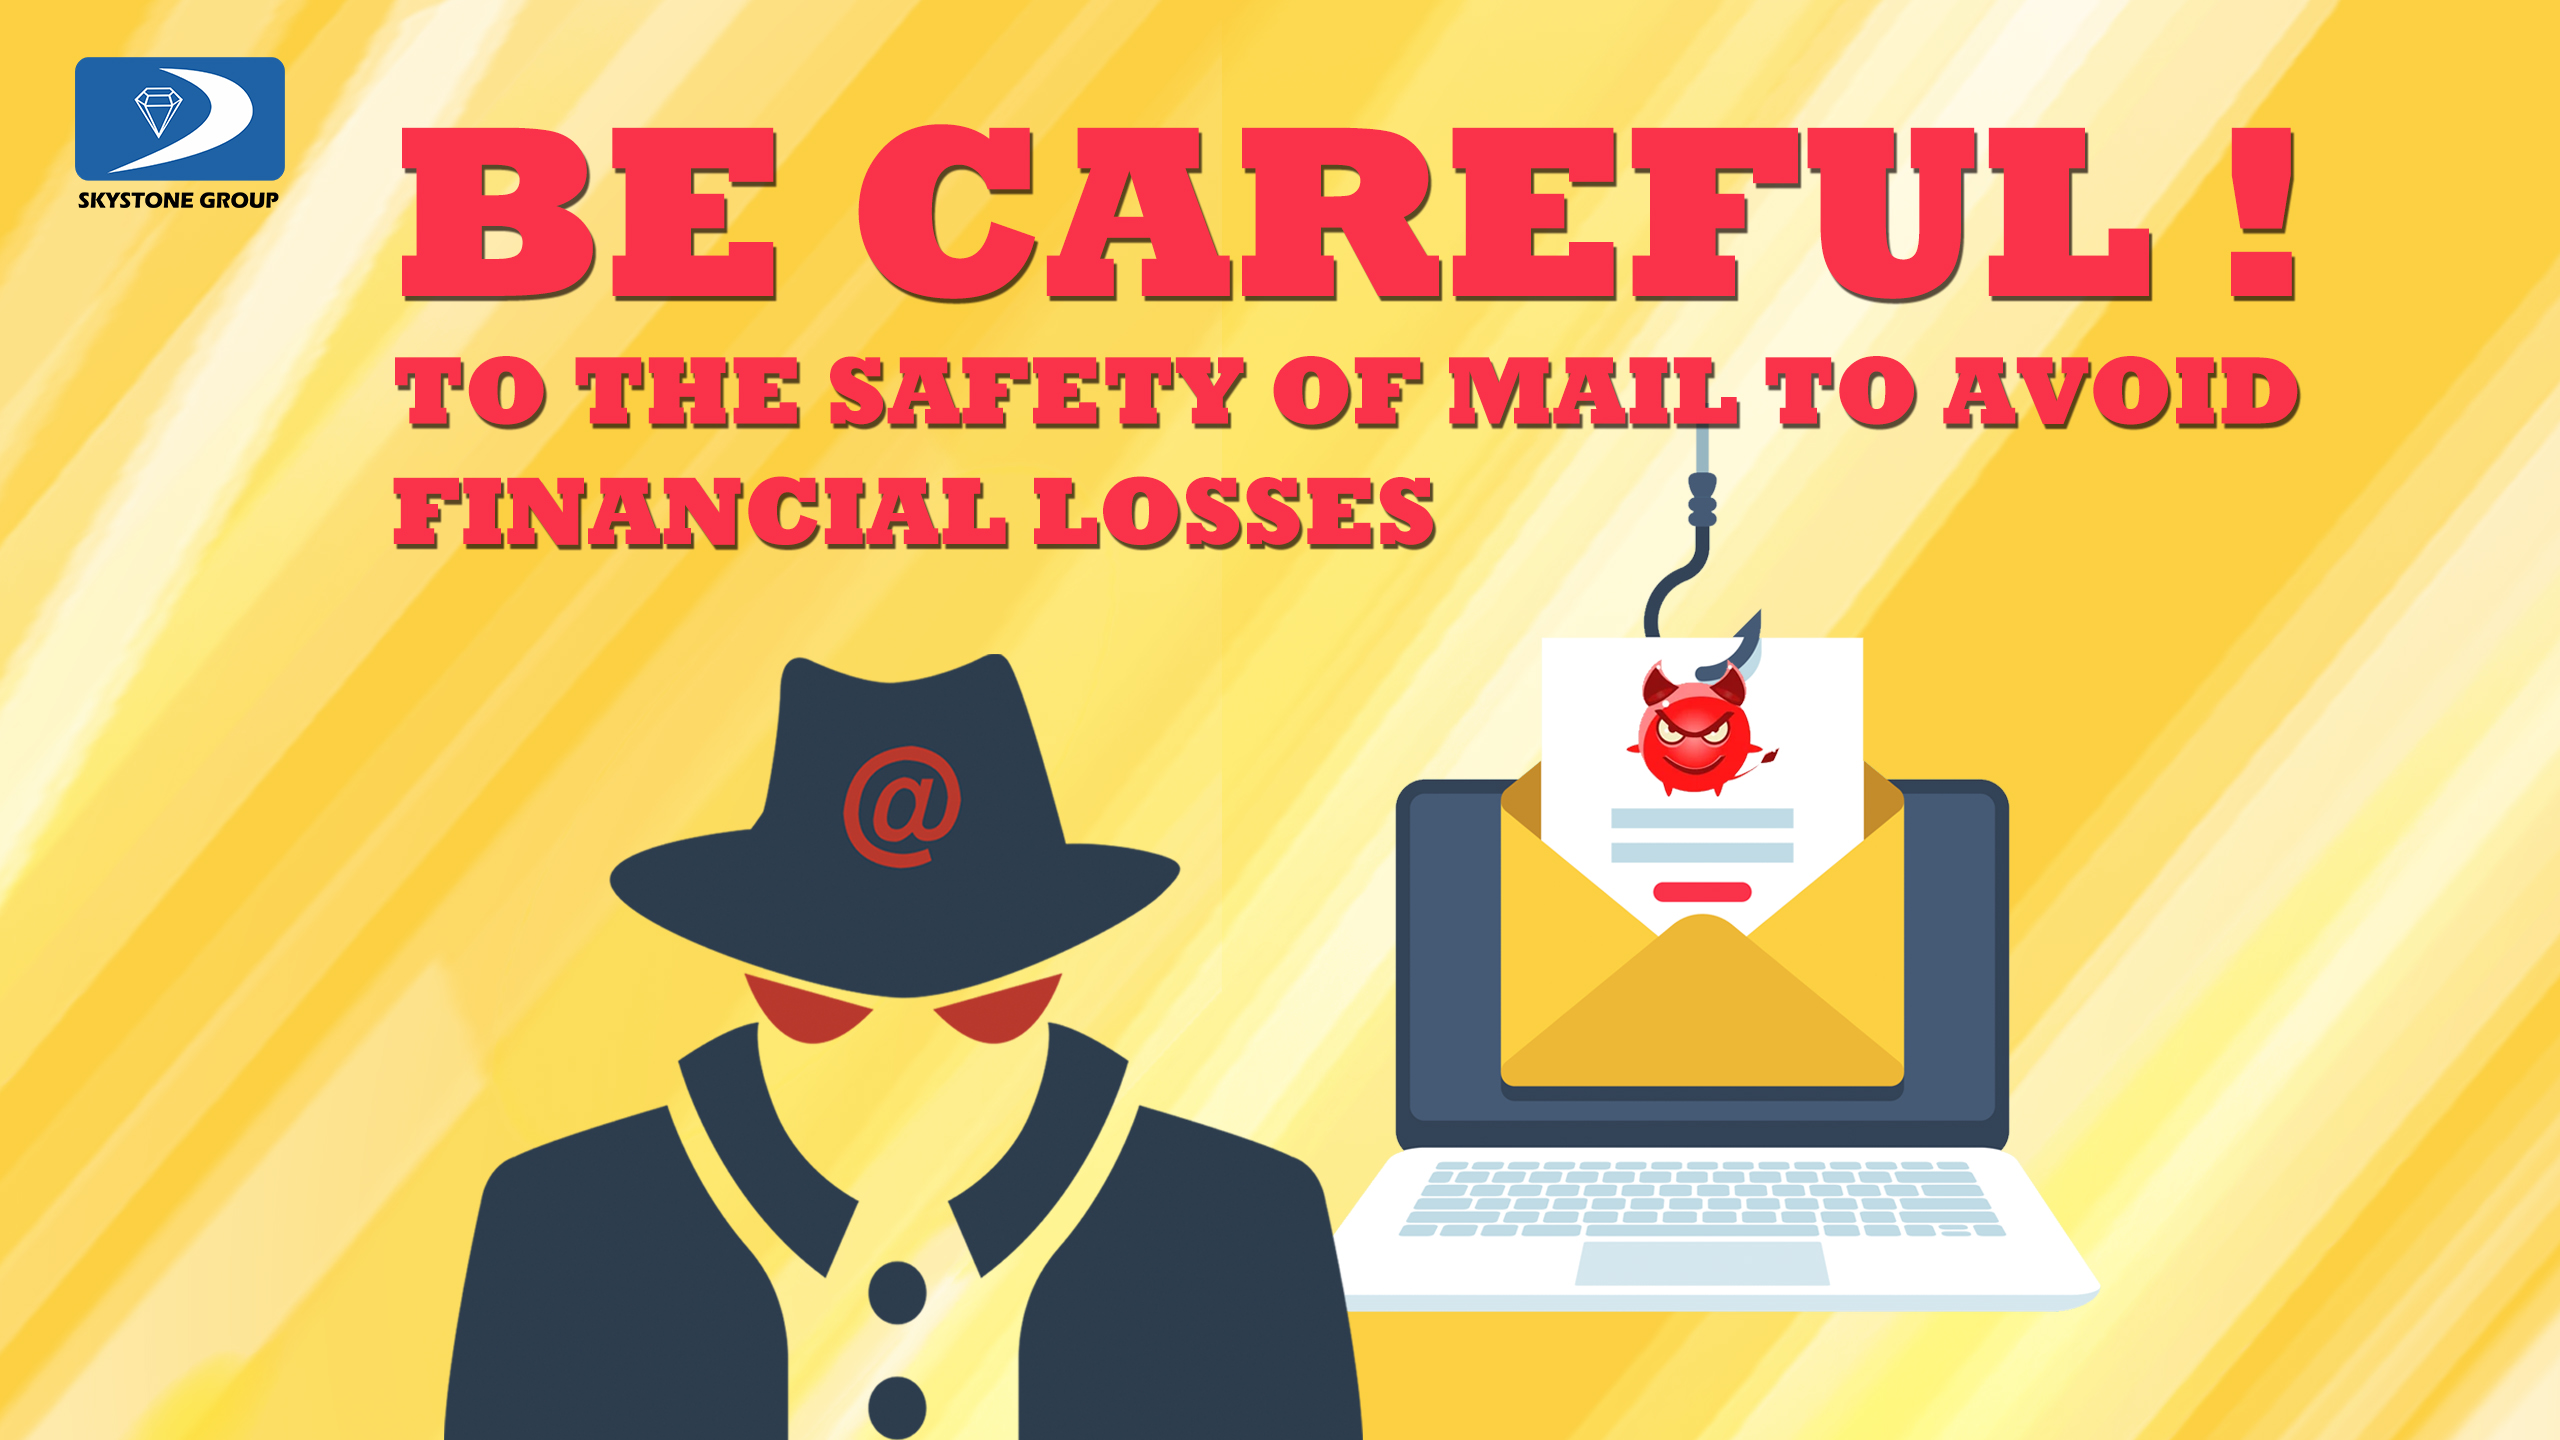 BE CAREFUL TO THE SAFETY OF MAIL TO AVOID FINANCIAL LOSSES